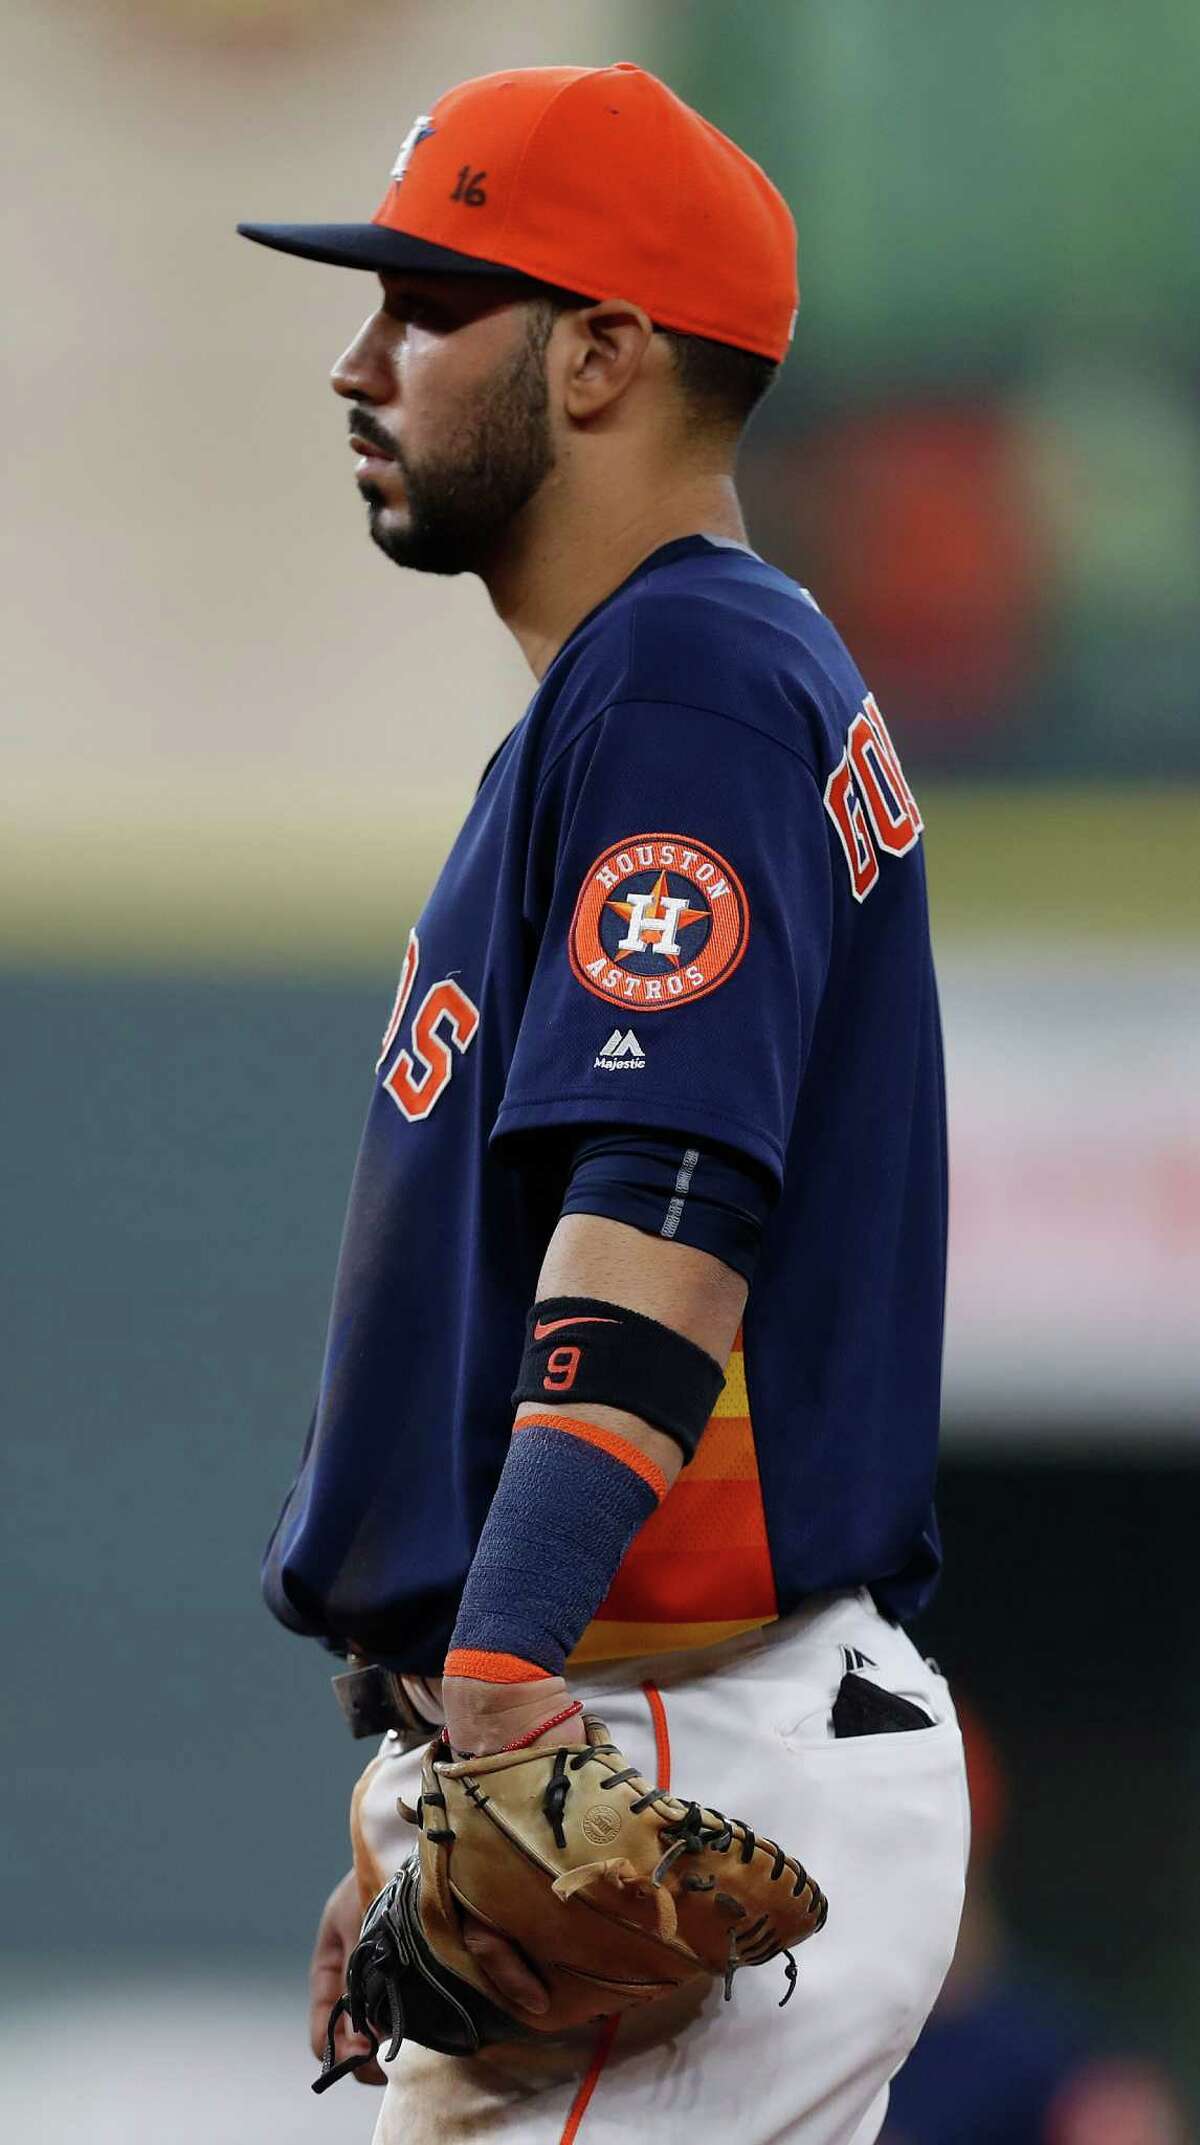 Houston Astros first baseman Marwin Gonzalez (9) wears his baseball cap with "16" written on it in honor of Marlin's Jose Fernandez, who was killed in an overnight boating accident, during the fourth inning of an MLB game at Minute Maid Park, Sunday, Sept. 25, 2016 in Houston.